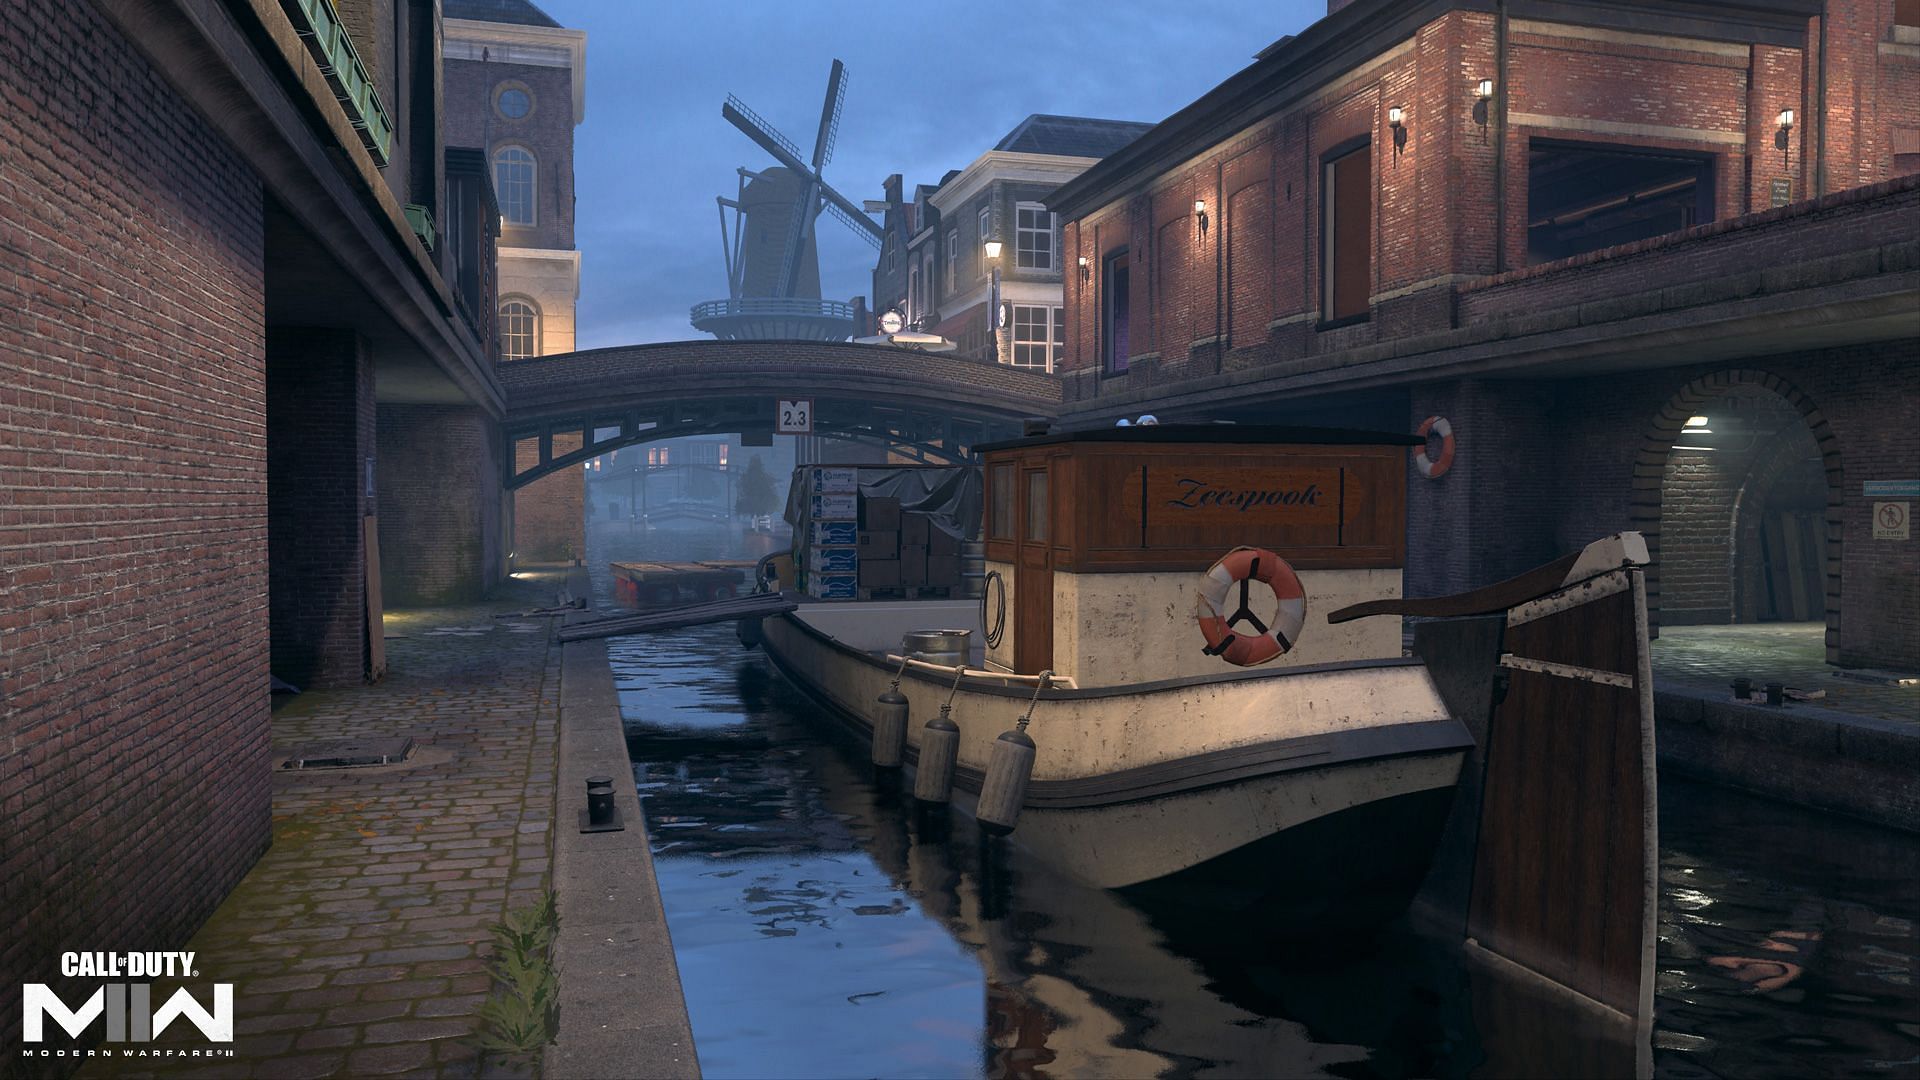 Canal (Image via Activision)